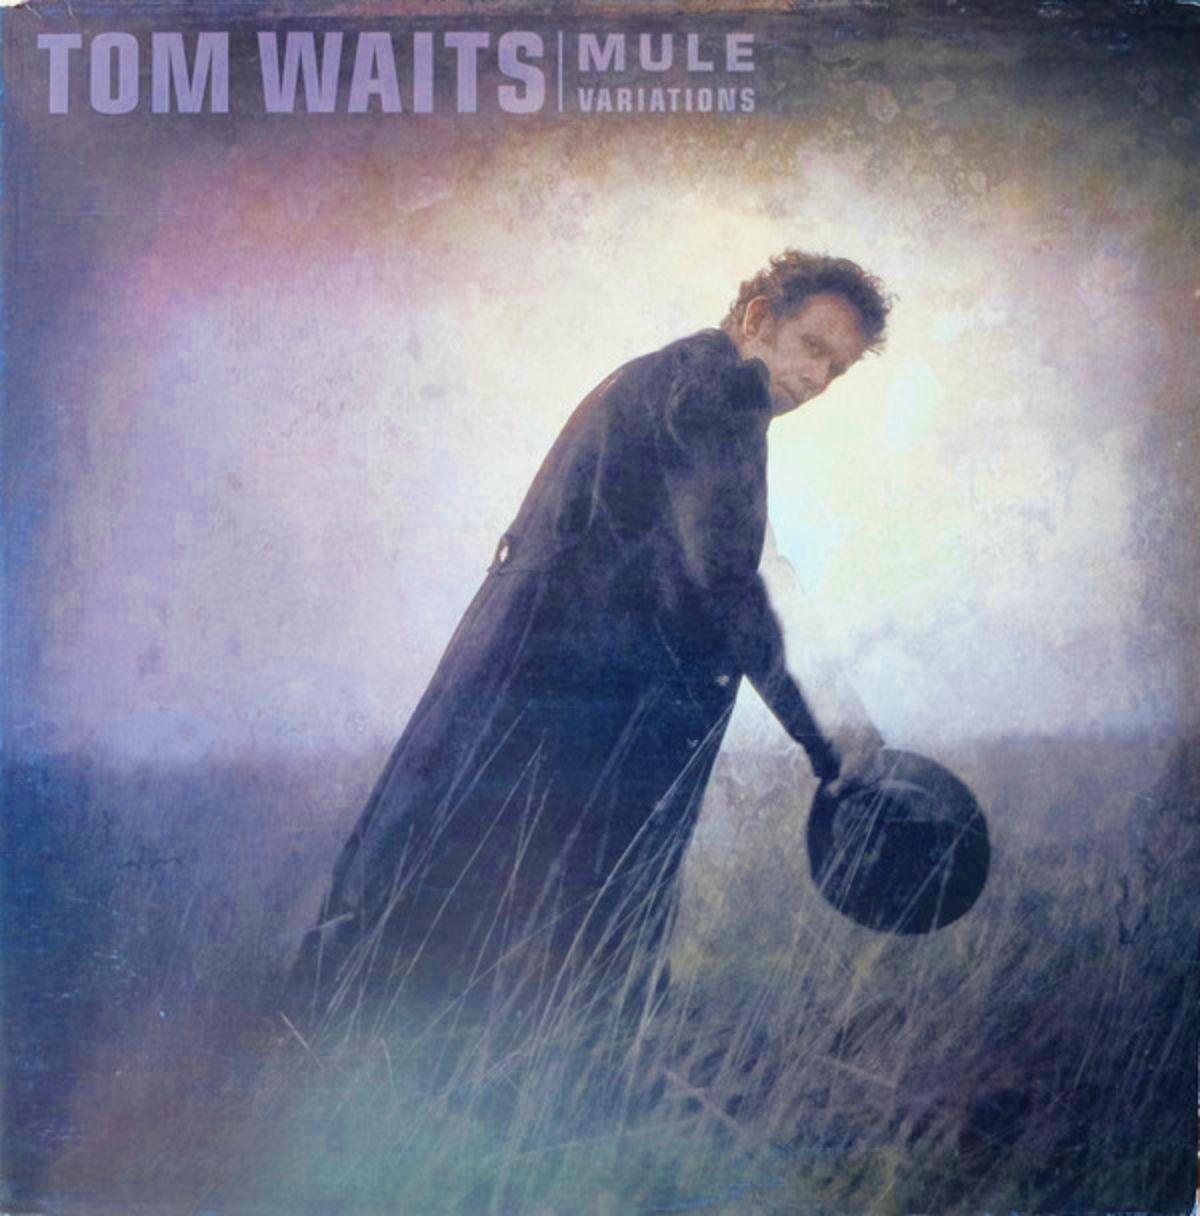 The cover of the album Mule Variations by Tom Waits...